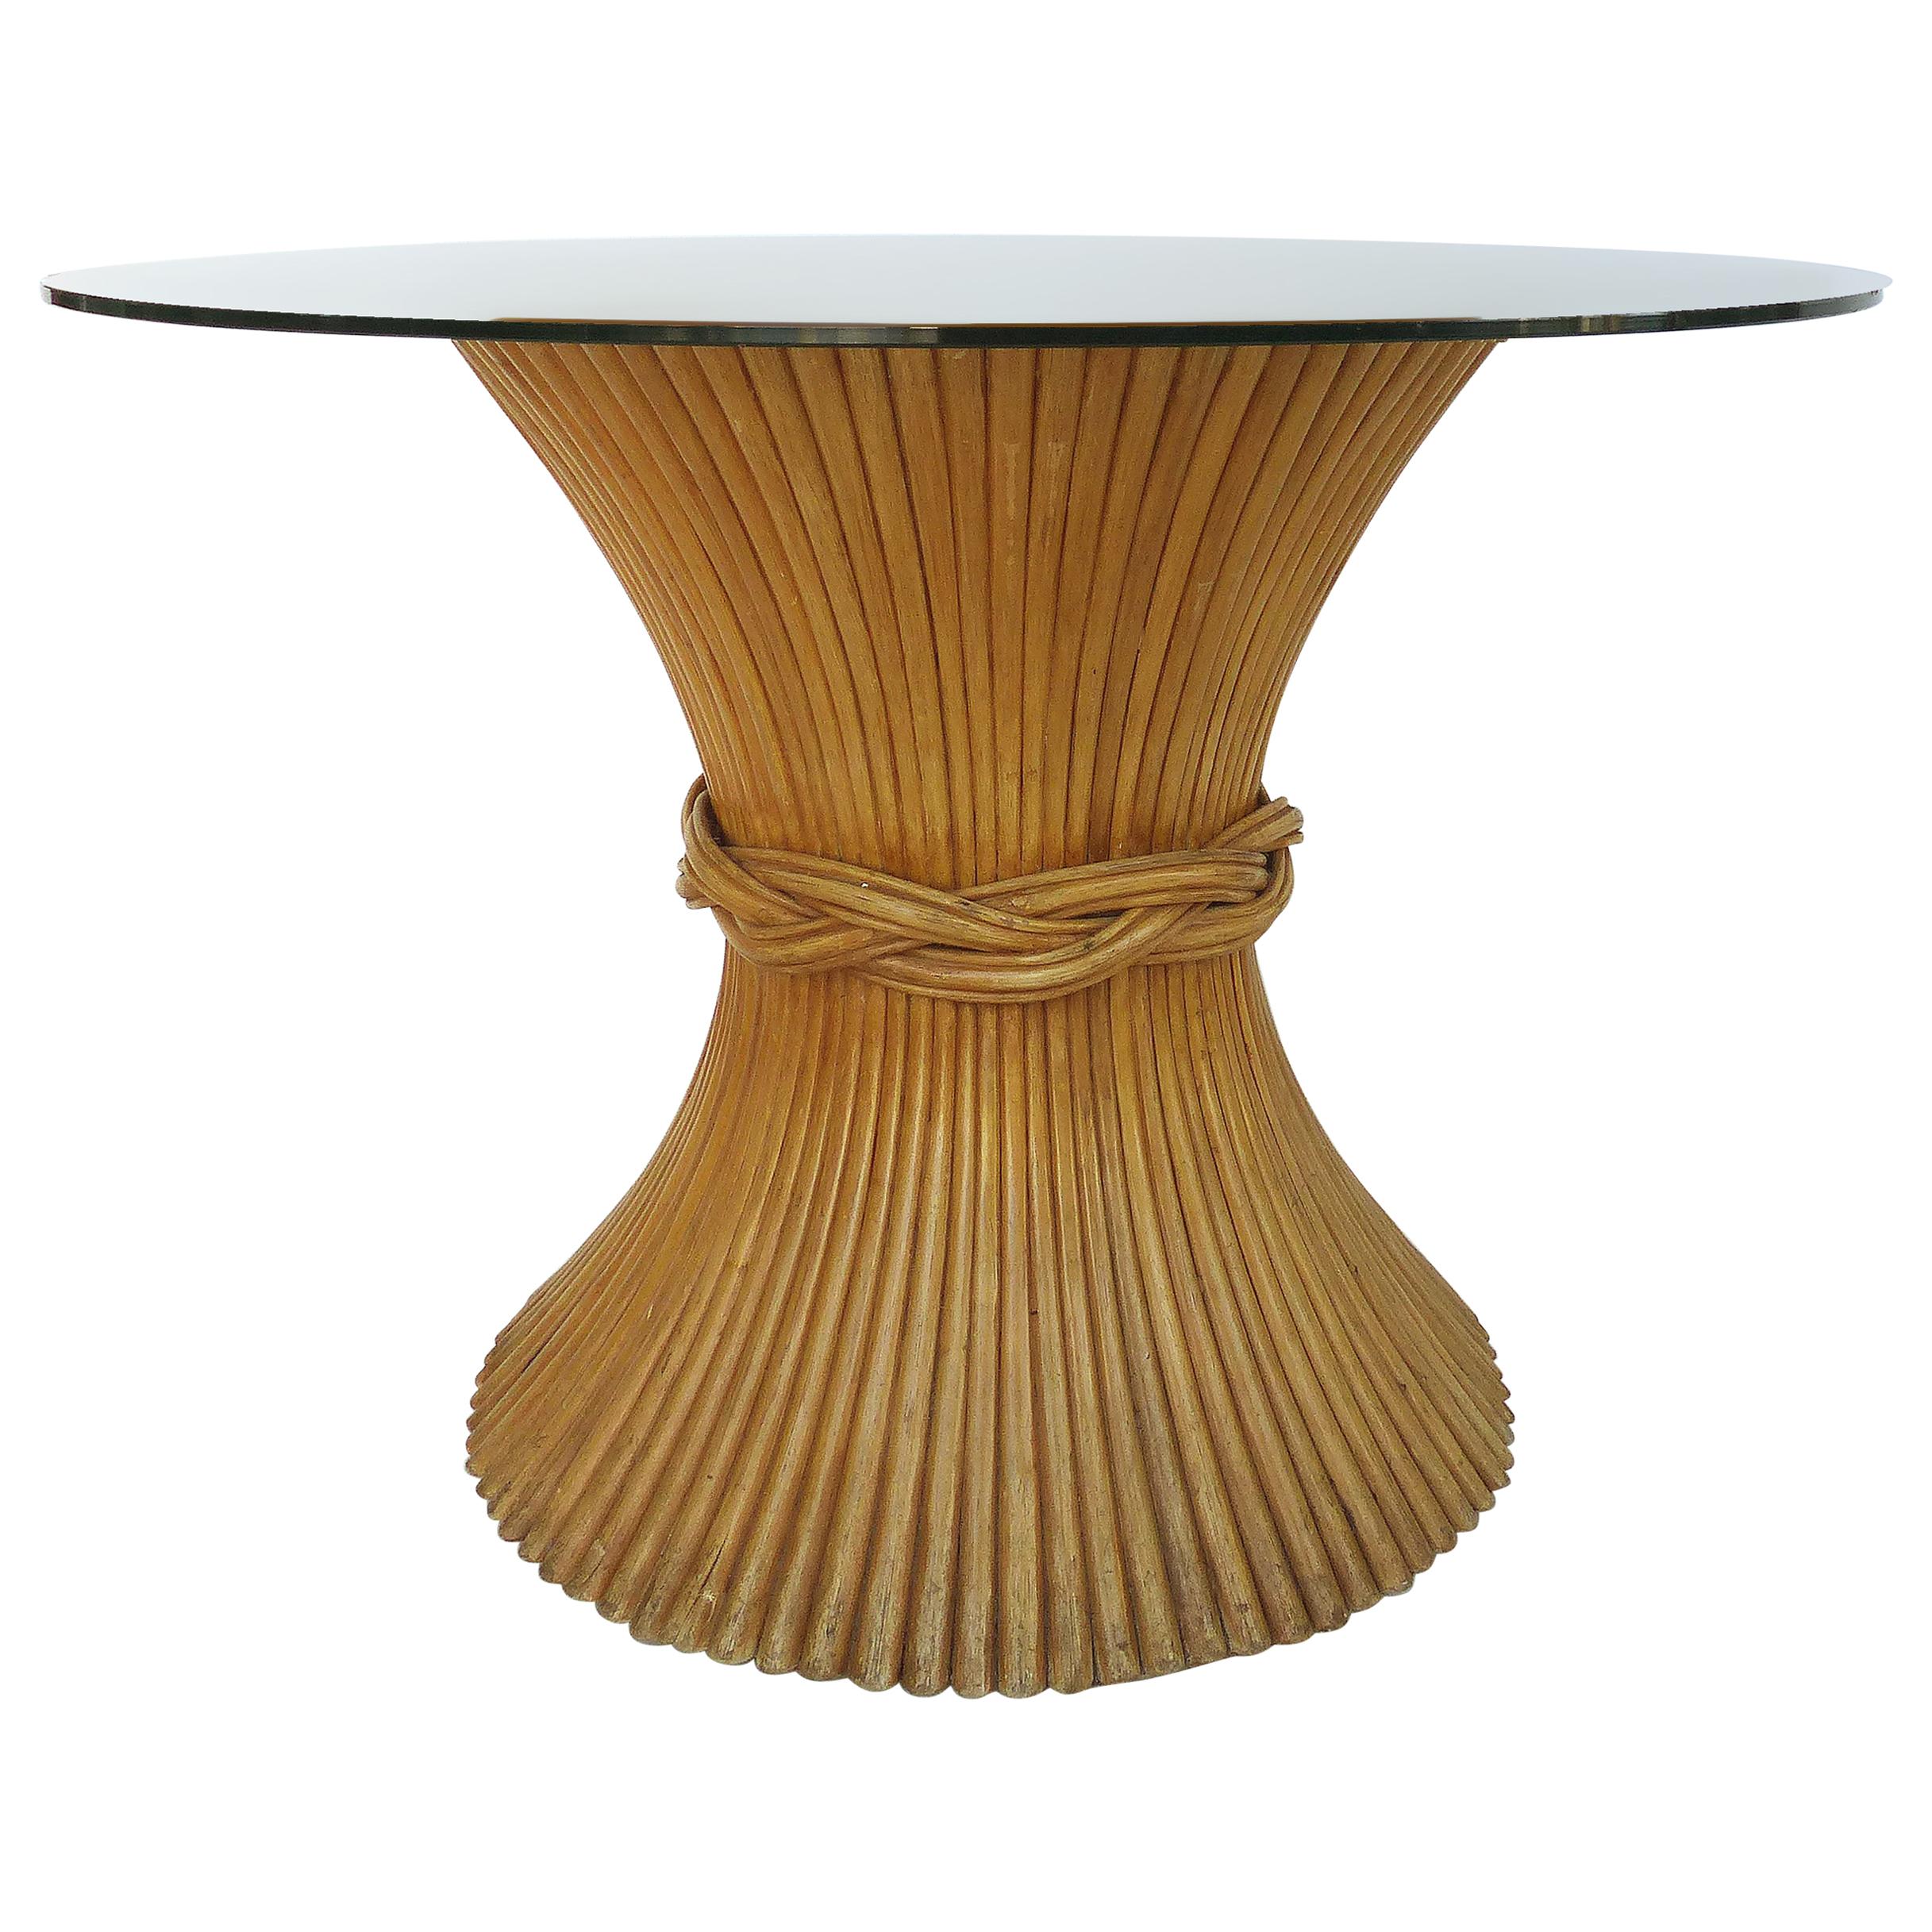 McGuire Furniture Sheaf of Wheat Dining Table with Glass Top